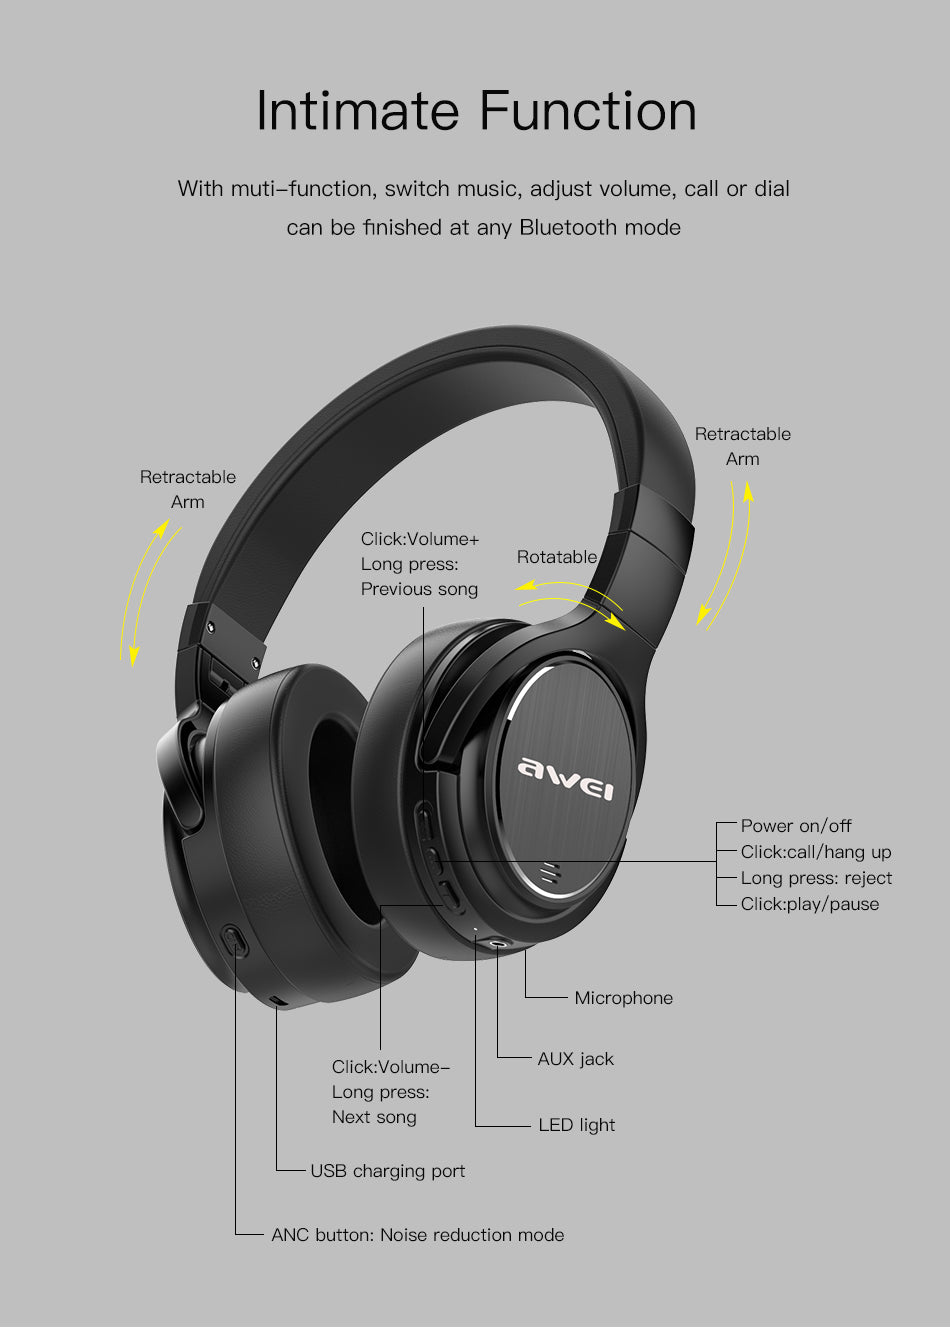 Awei A950BL Active Noise Cancellation Bluetooth Wireless Headphones (Over-Ear, Foldable) up to 46h playback on Single Charge